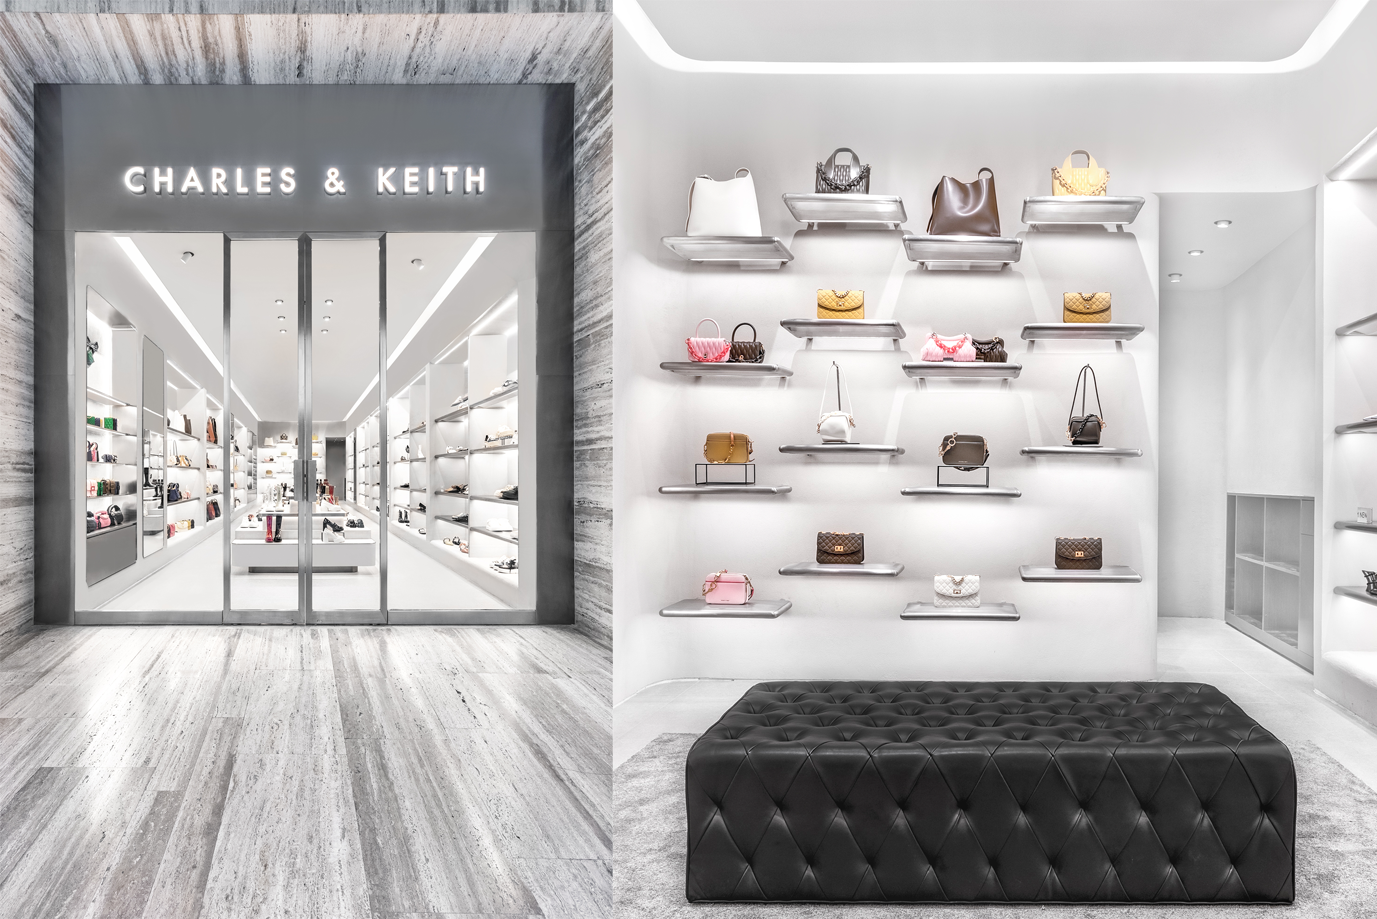 Carved out to provide a respite from the noise of the outside world, CHARLES & KEITH’s first brick-and-mortar store at the Artz Pedregal Mall in Mexico City is thoughtfully designed to reflect a contemporary perspective of simplicity and sophistication from the textures of the interior, to the presentation of the merchandise.